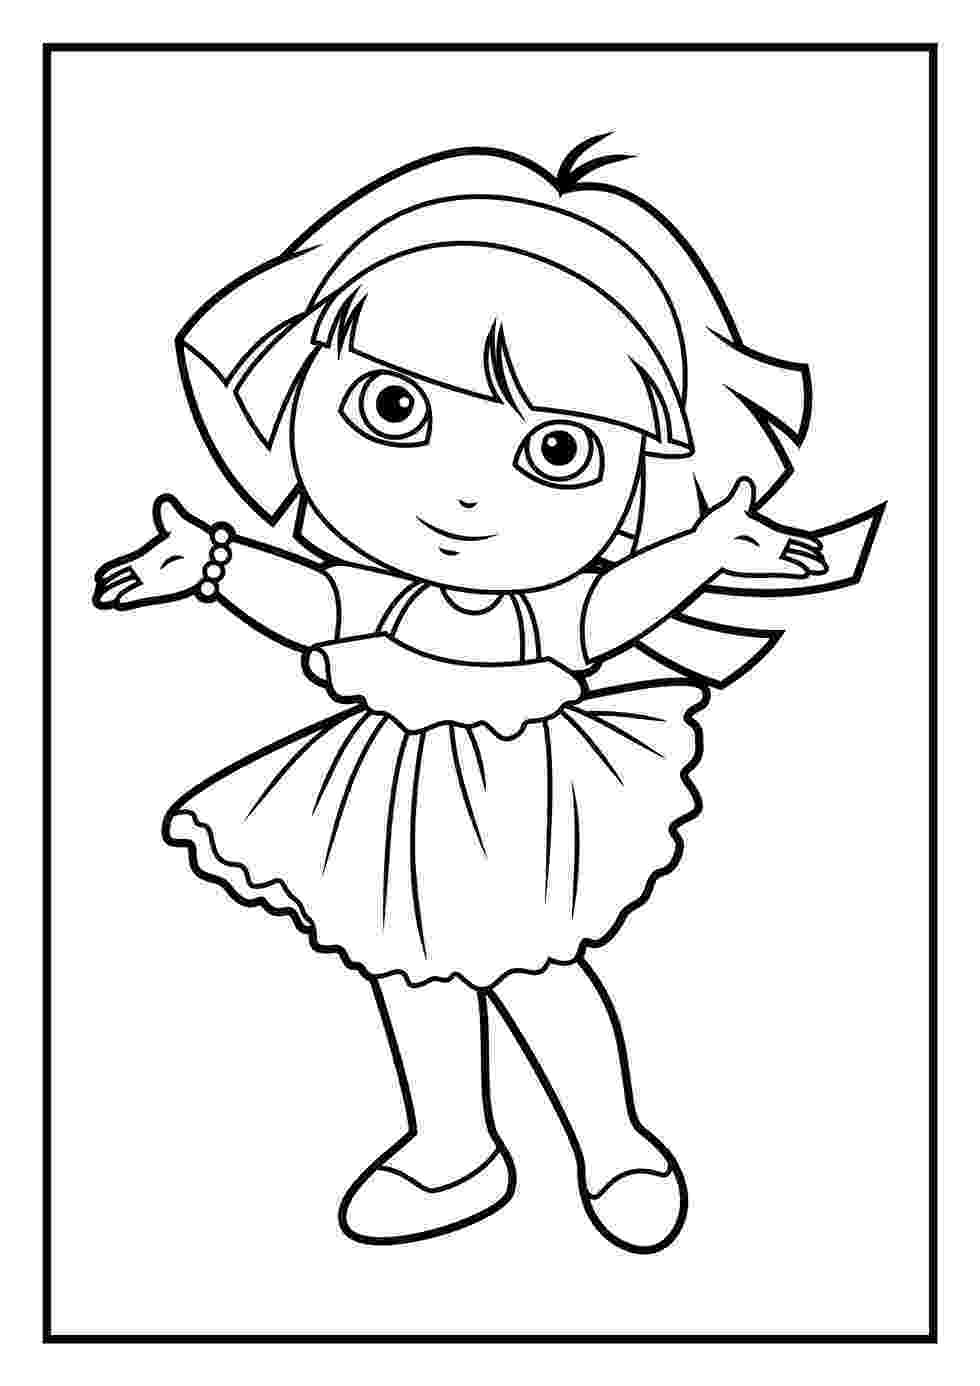 dora colouring dora coloring pages diego coloring pages colouring dora 